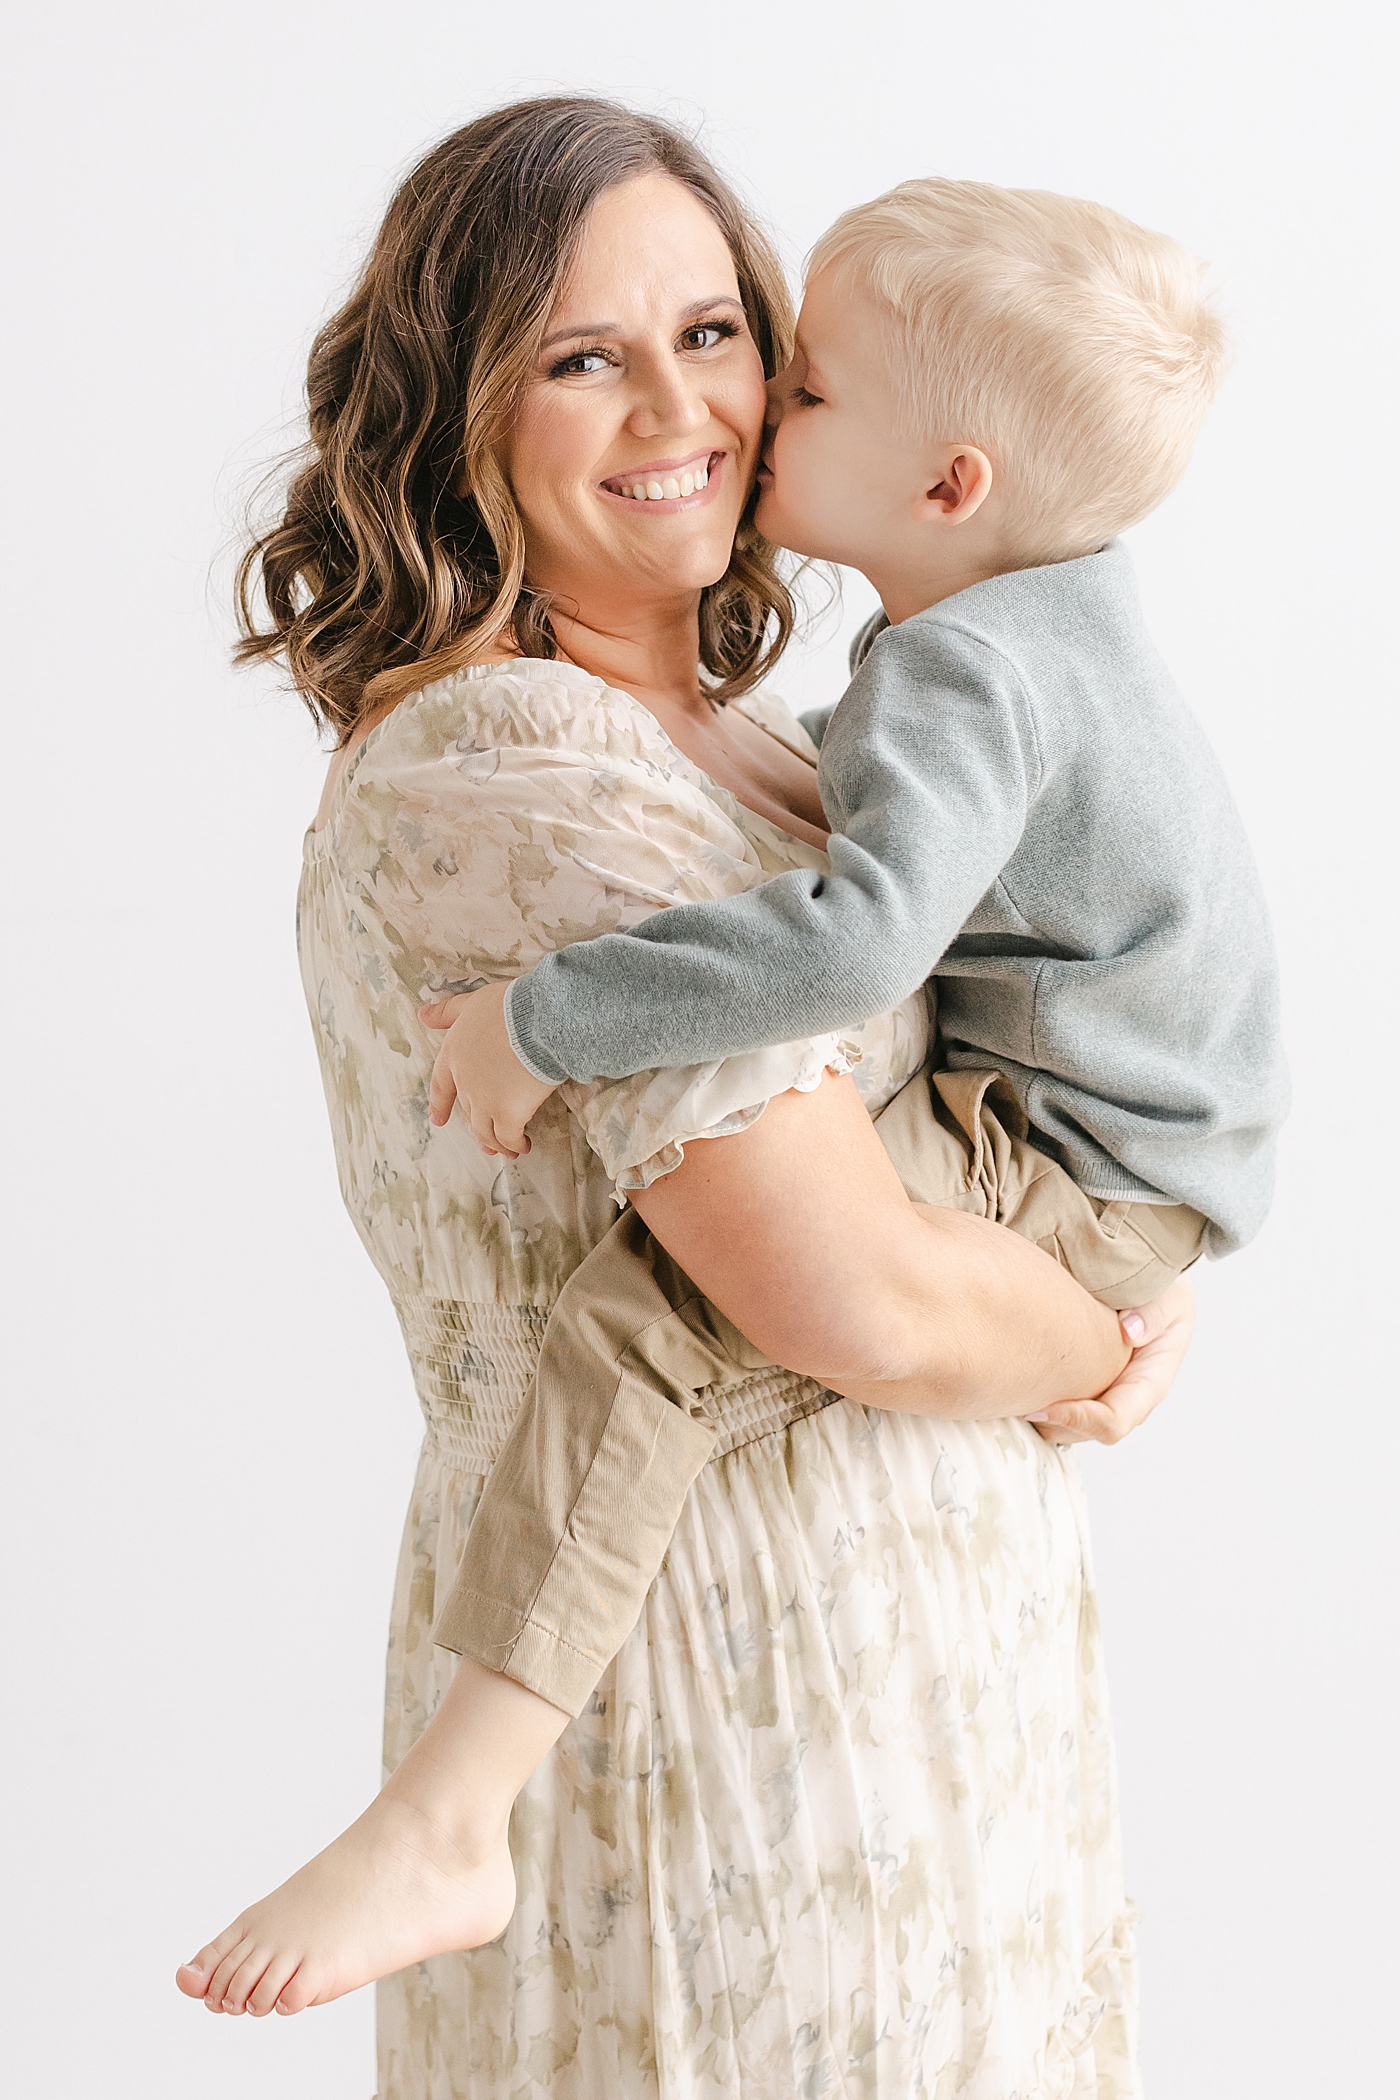 Mom snuggling with her little boy during their playful family studio session in Austin | Photo by Sana Ahmed Photography